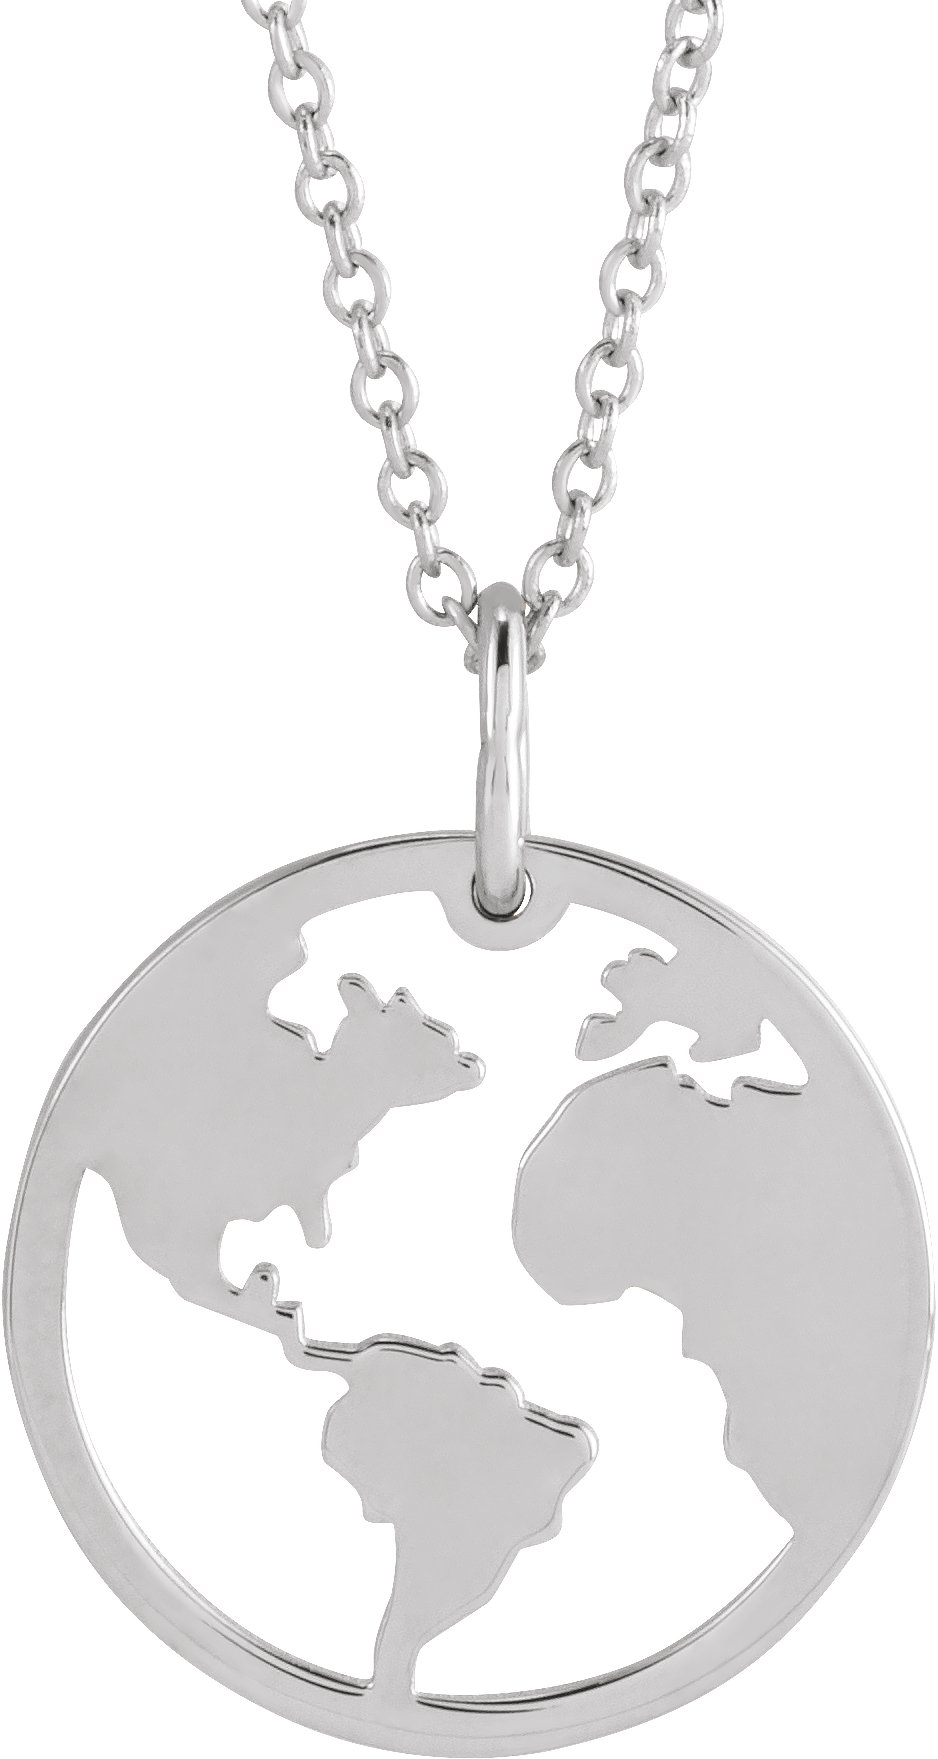 Sterling Silver 19.2x15 mm Earth Cutout 16-18" Necklace